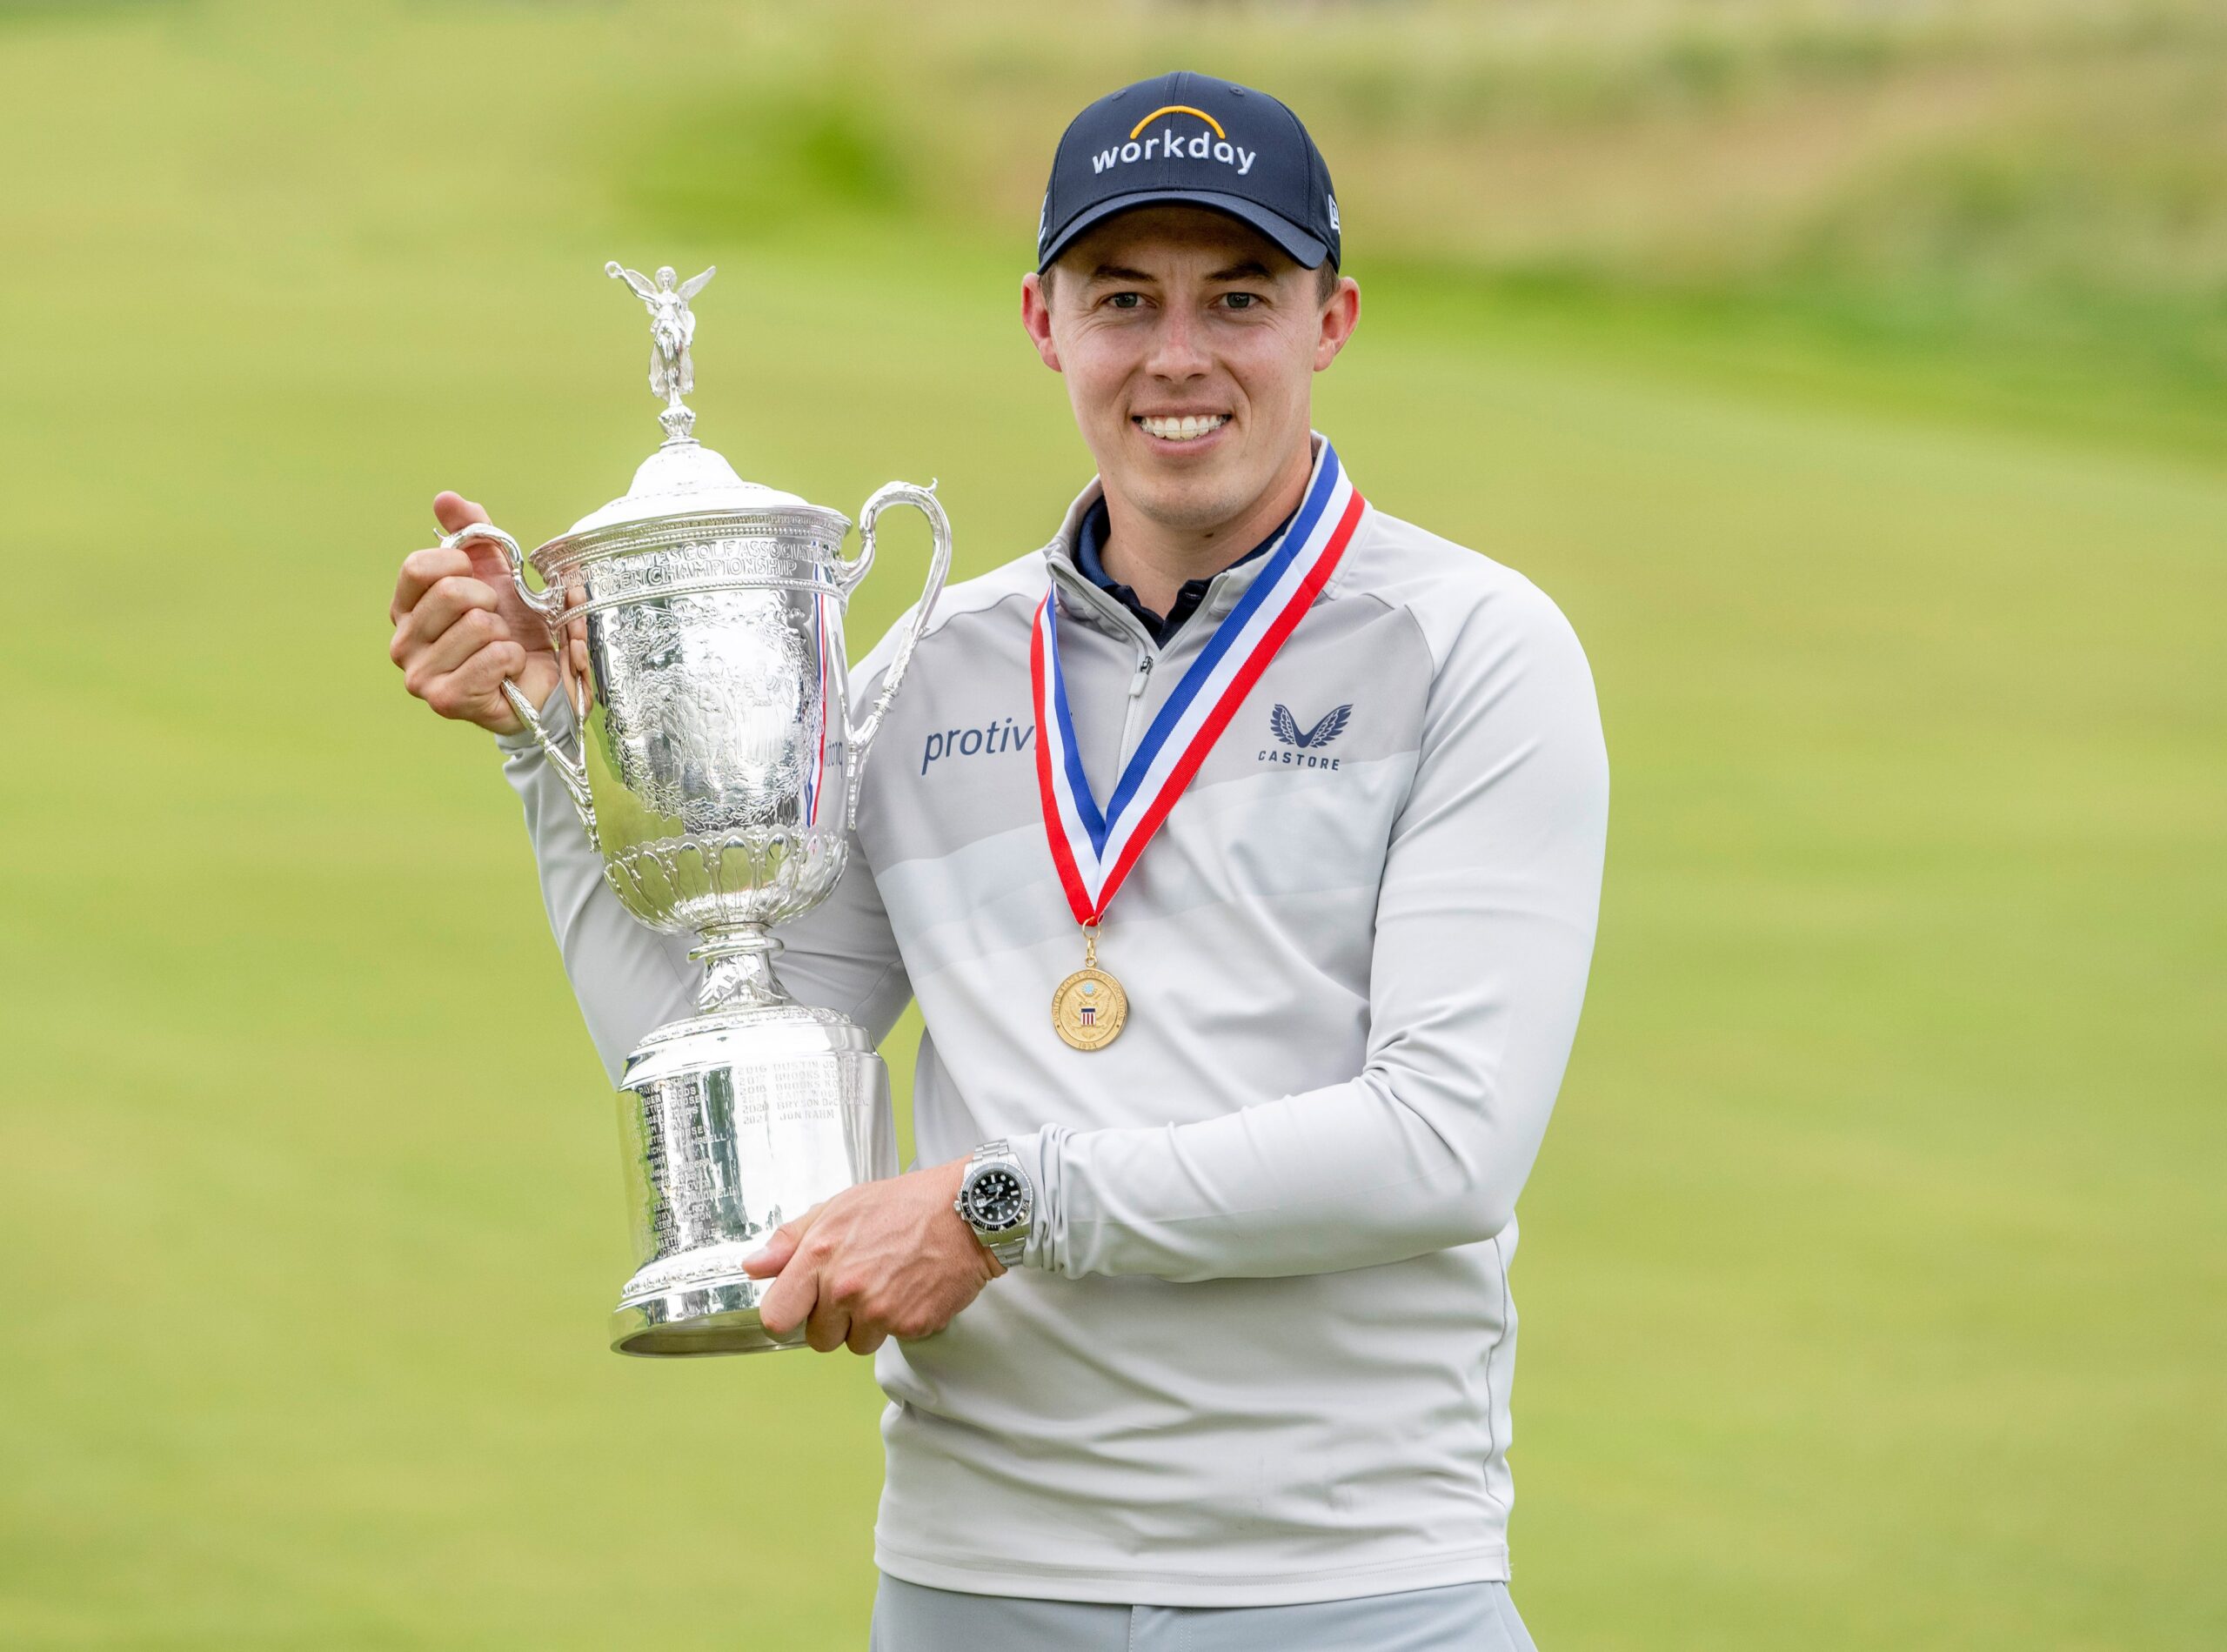 Matthew Fitzpatrick reigns supreme at The Country Club to capture historic U.S. Open